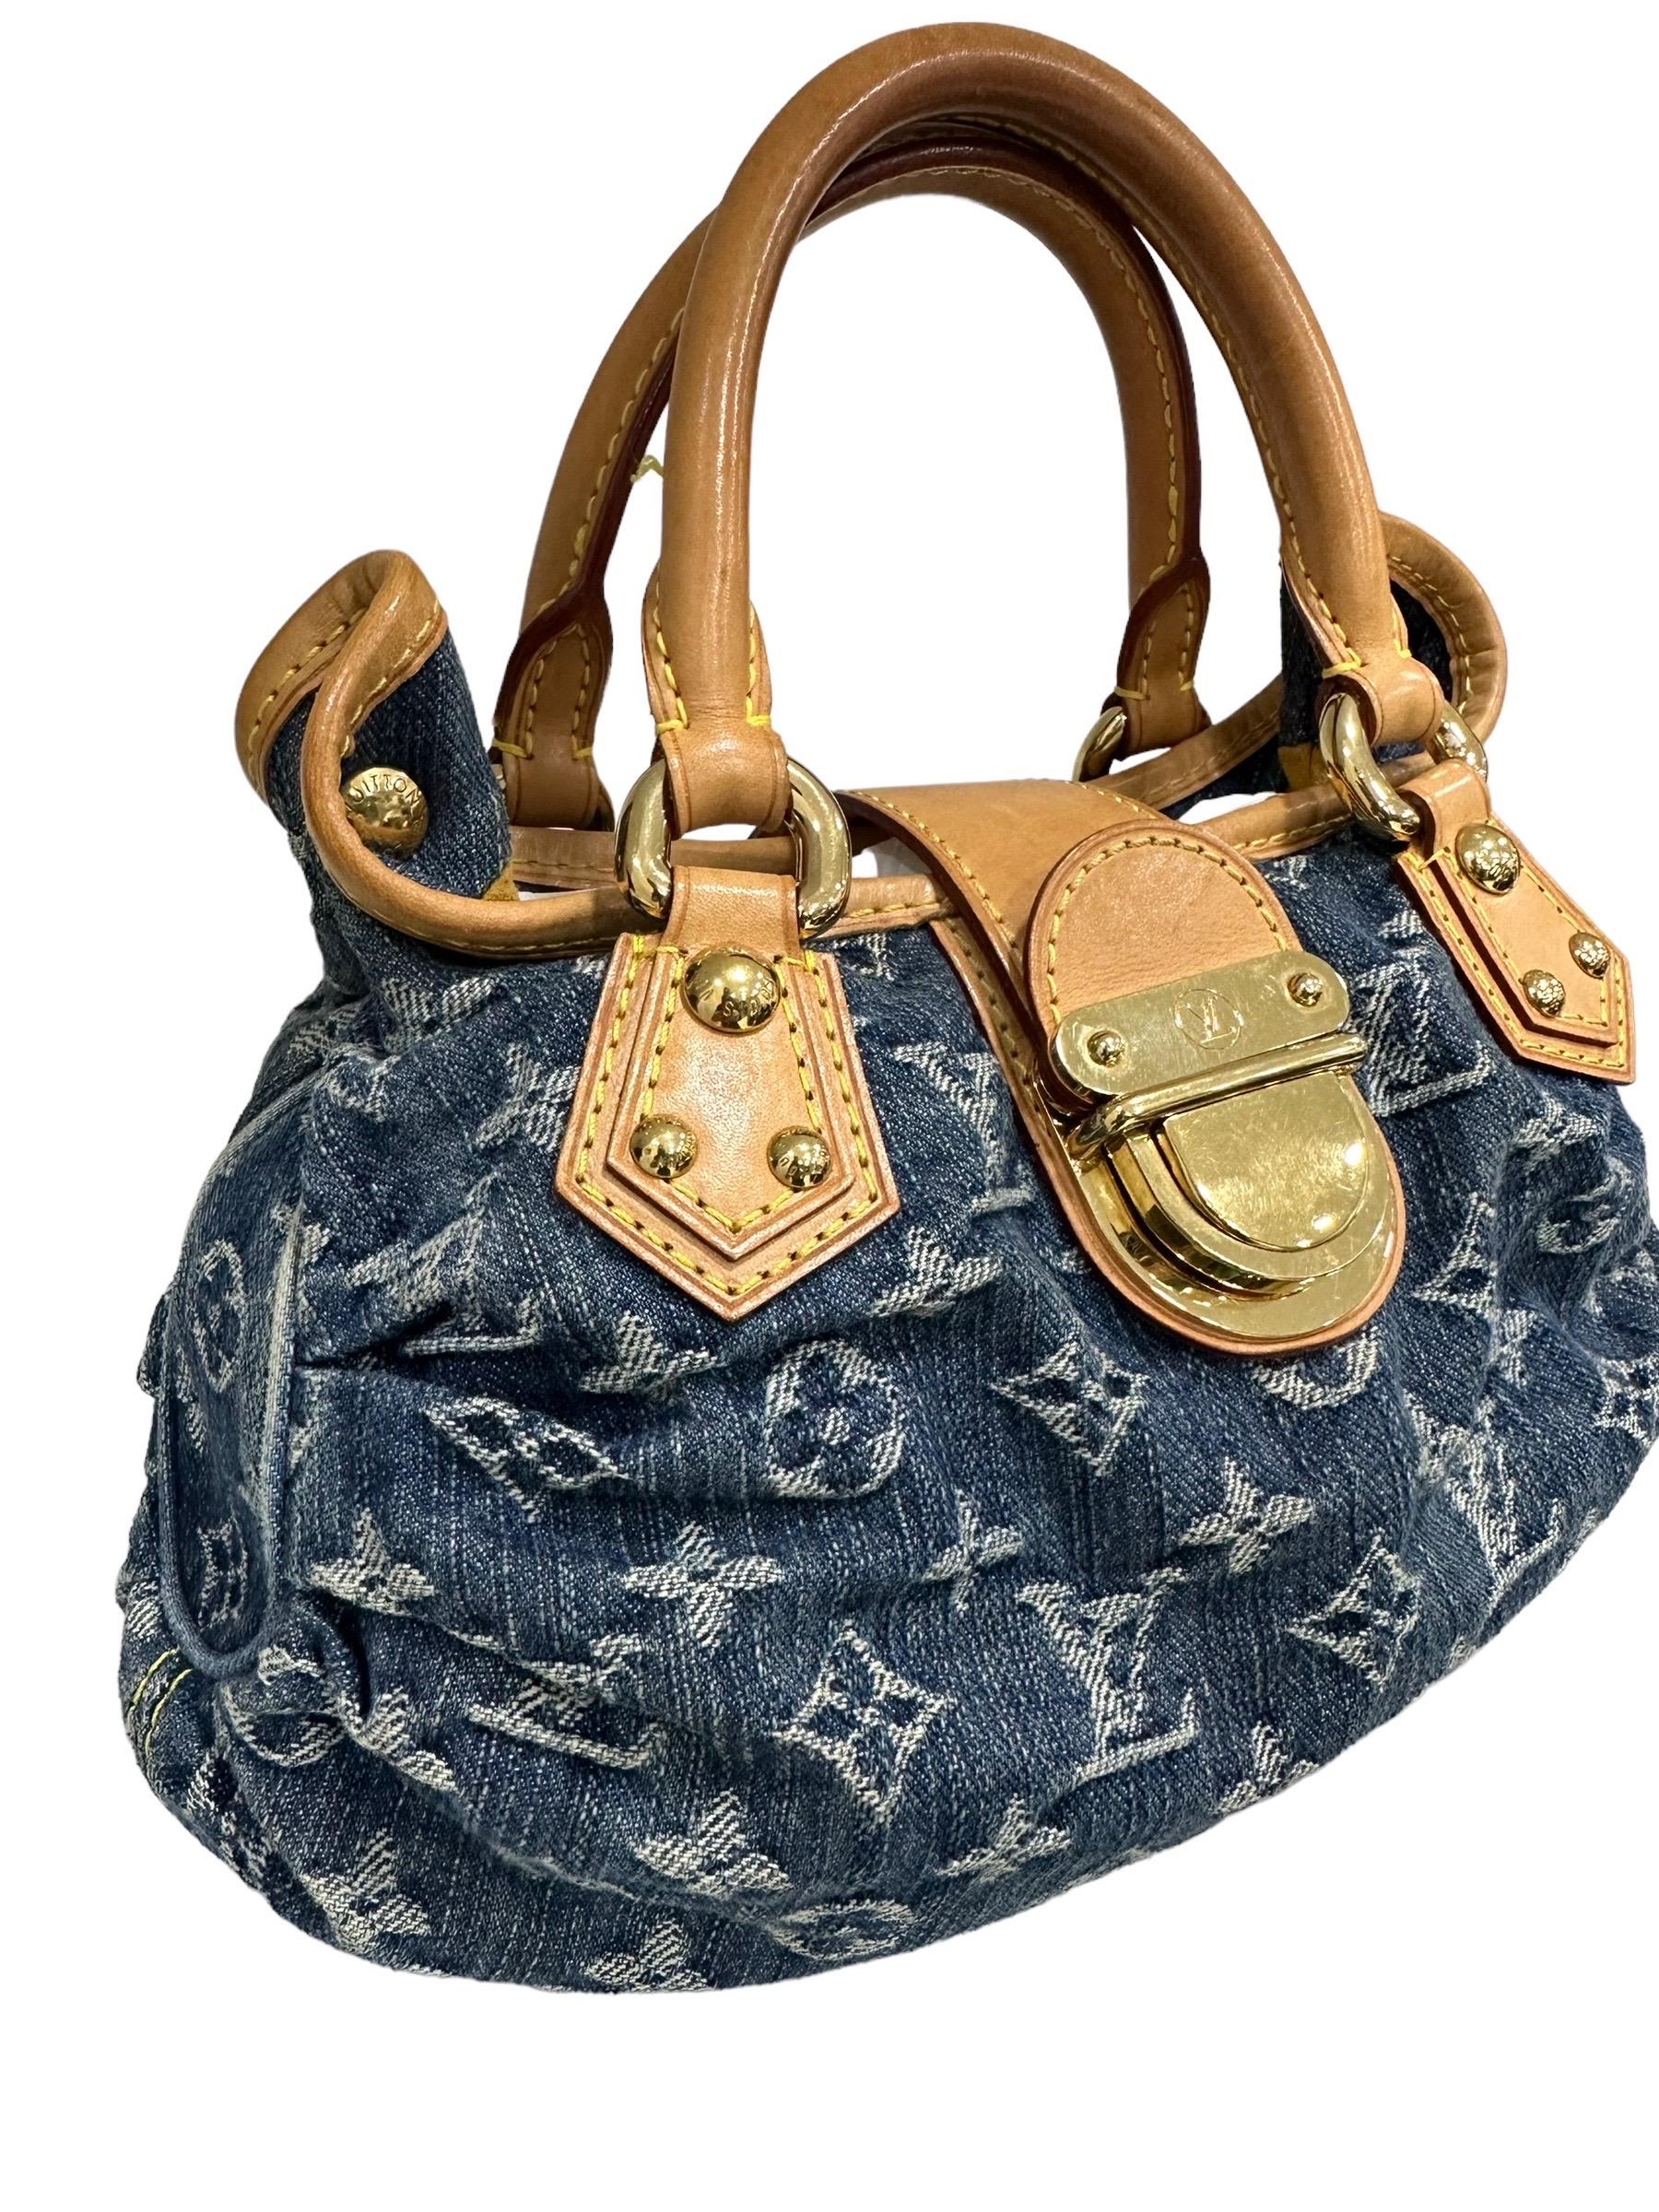 Louis Vuitton handbag, Pleaty model, size PM, year of production 2006, made in denim fabric with cowhide inserts and golden hardware. It has a central band with interlocking closure, internally lined in ocher suede, roomy for the essentials.